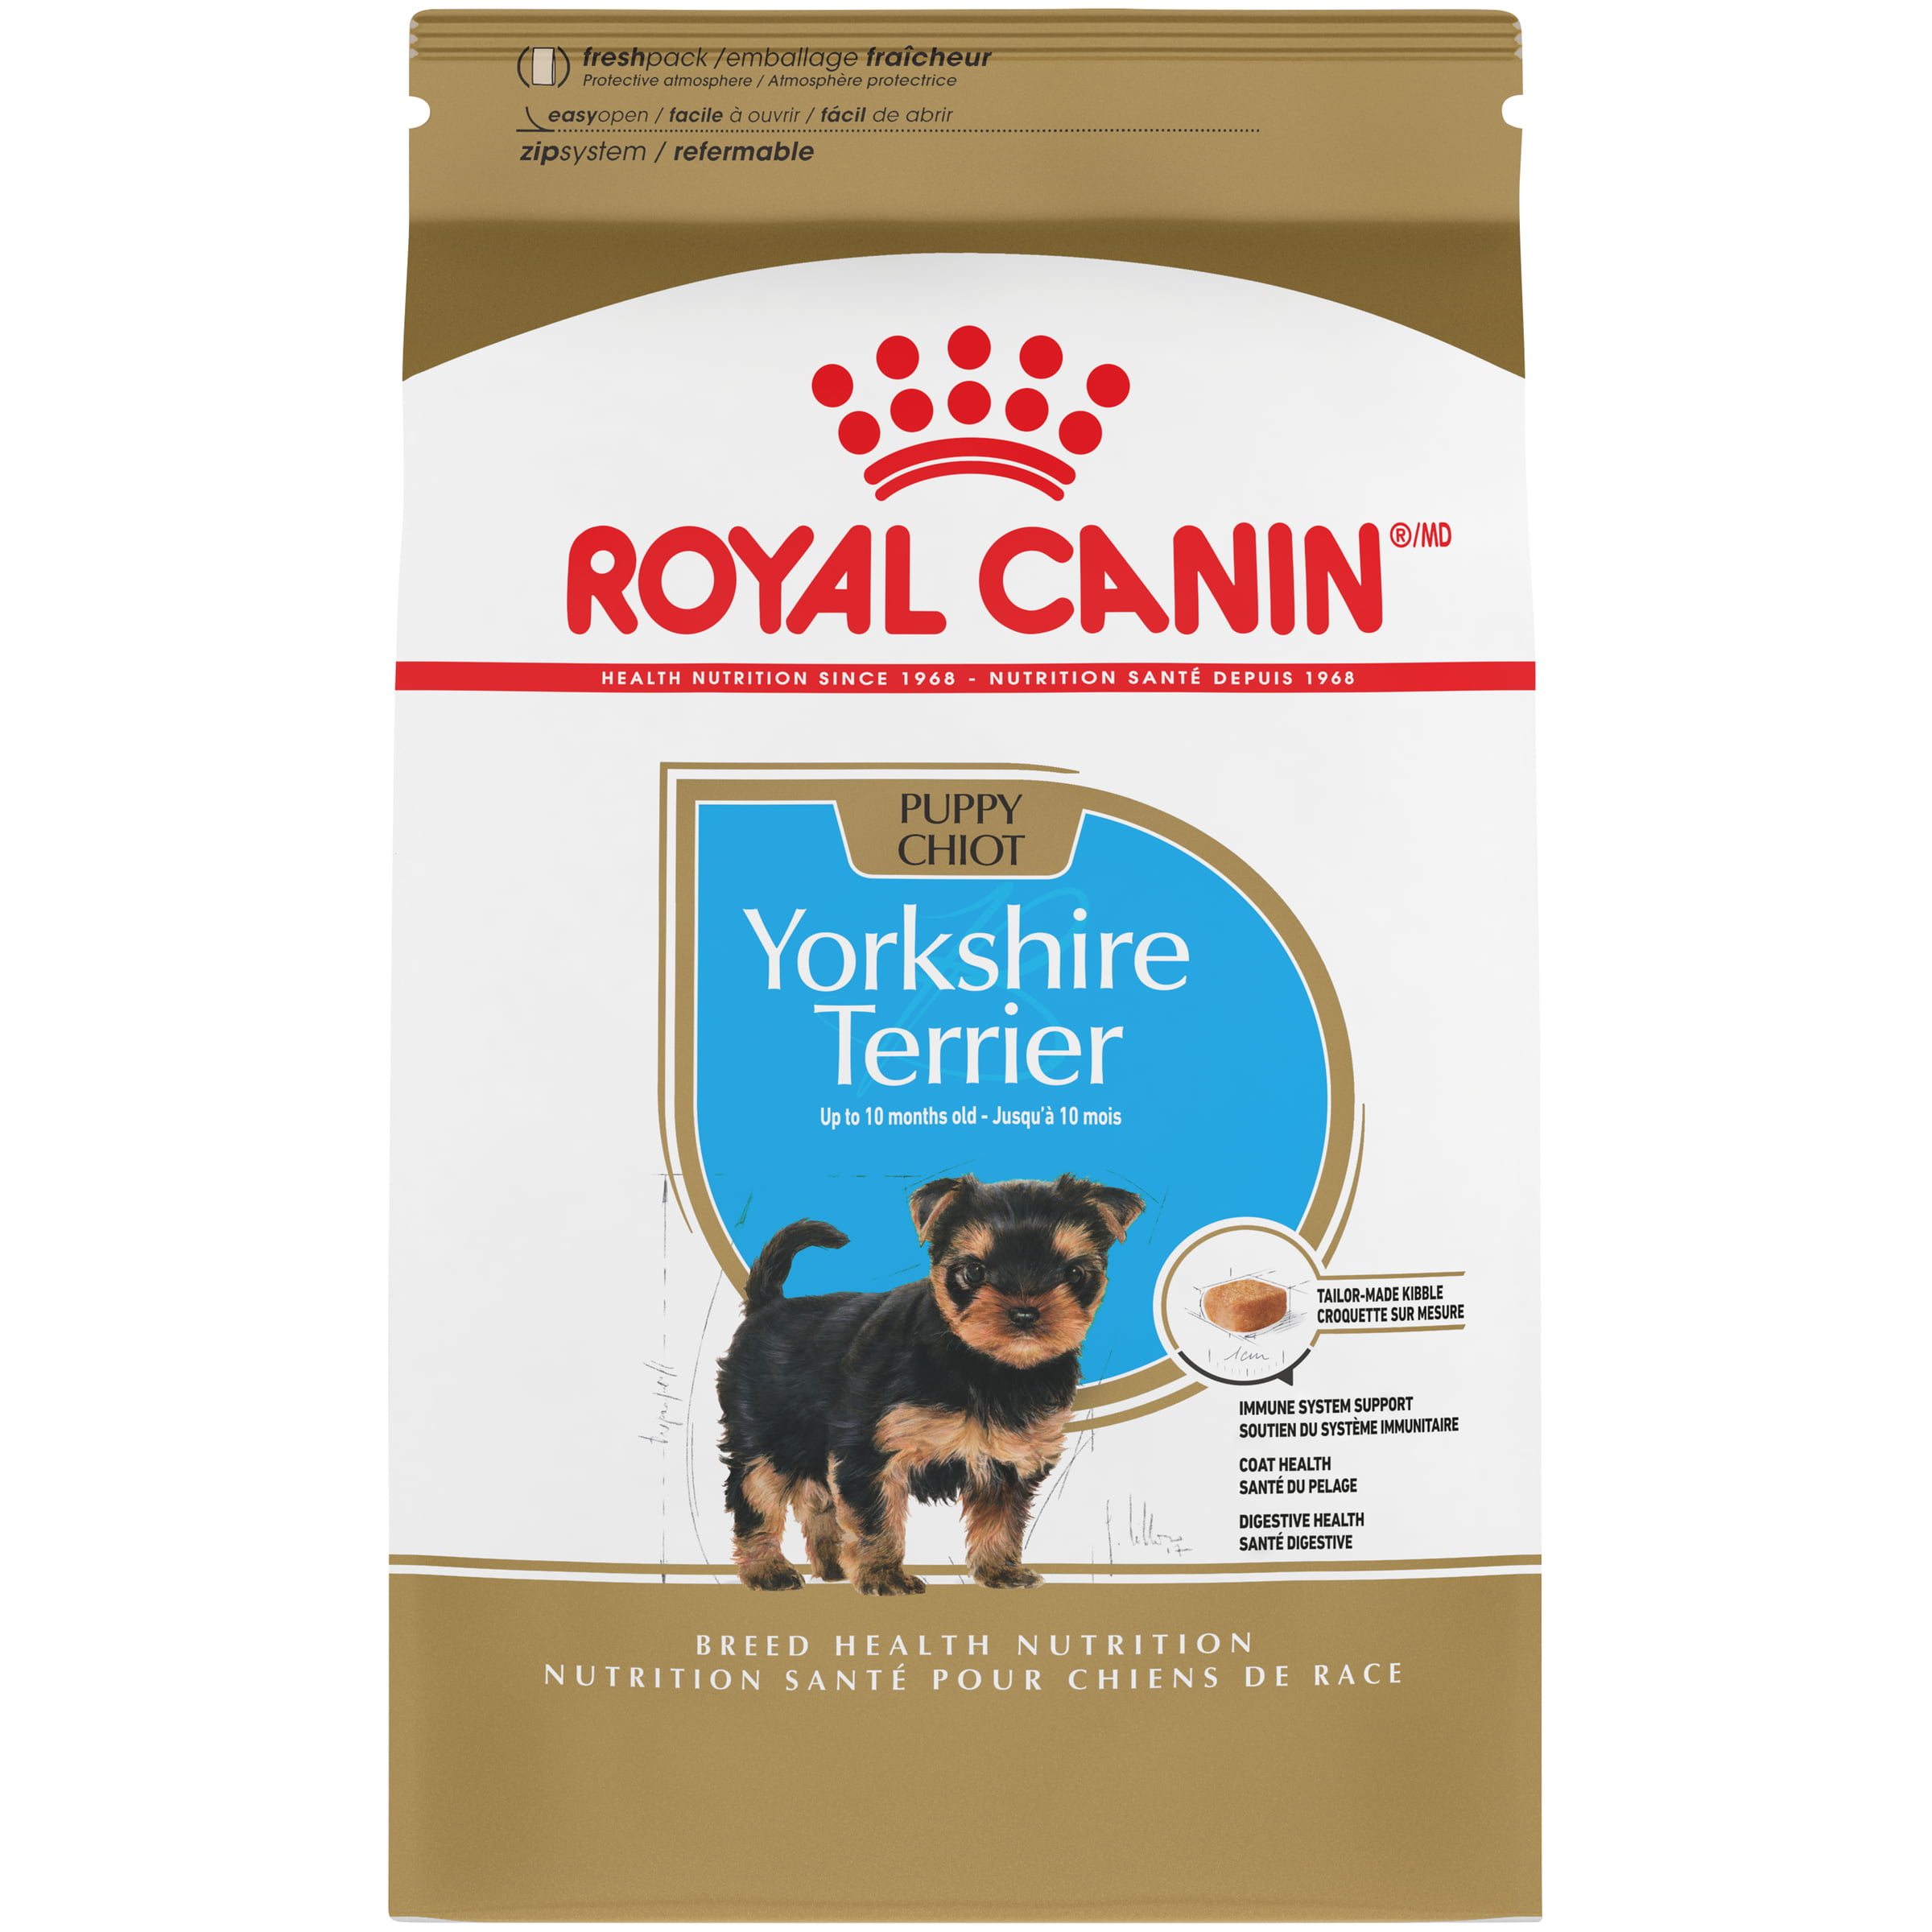 royal canin delivery